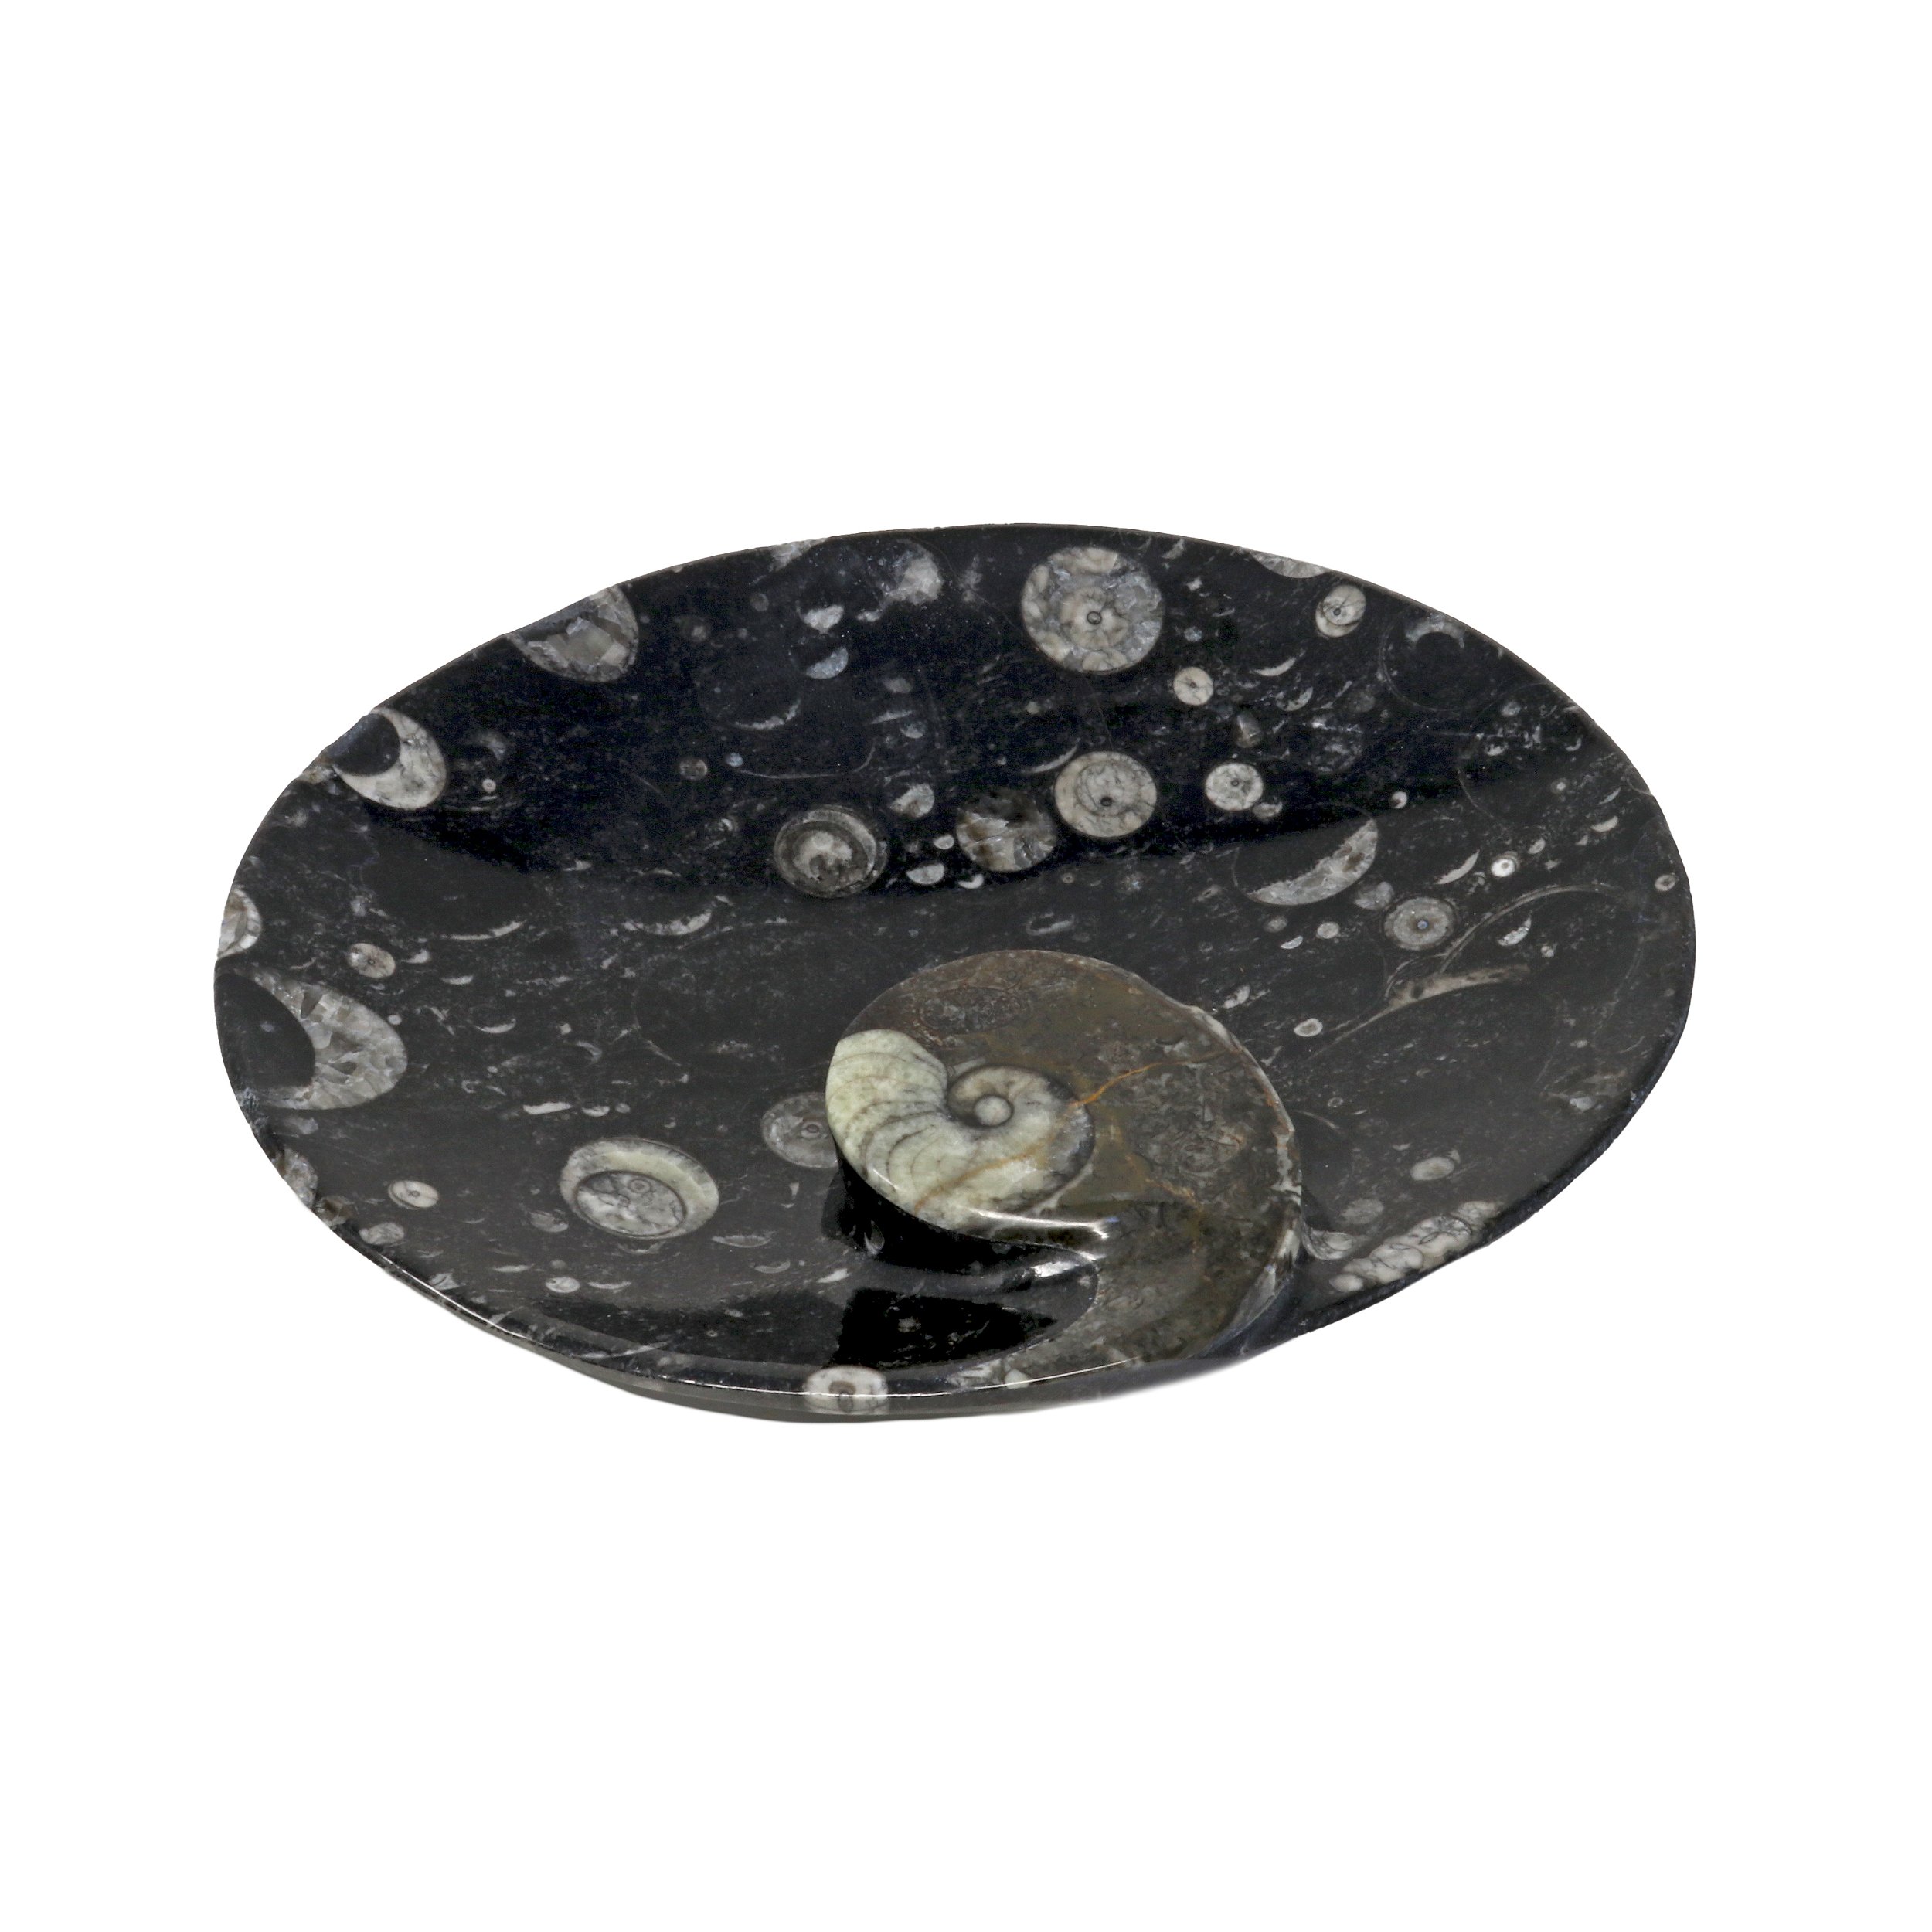 Orthoceras Fossil Seabed Oval Dish With Ammonite